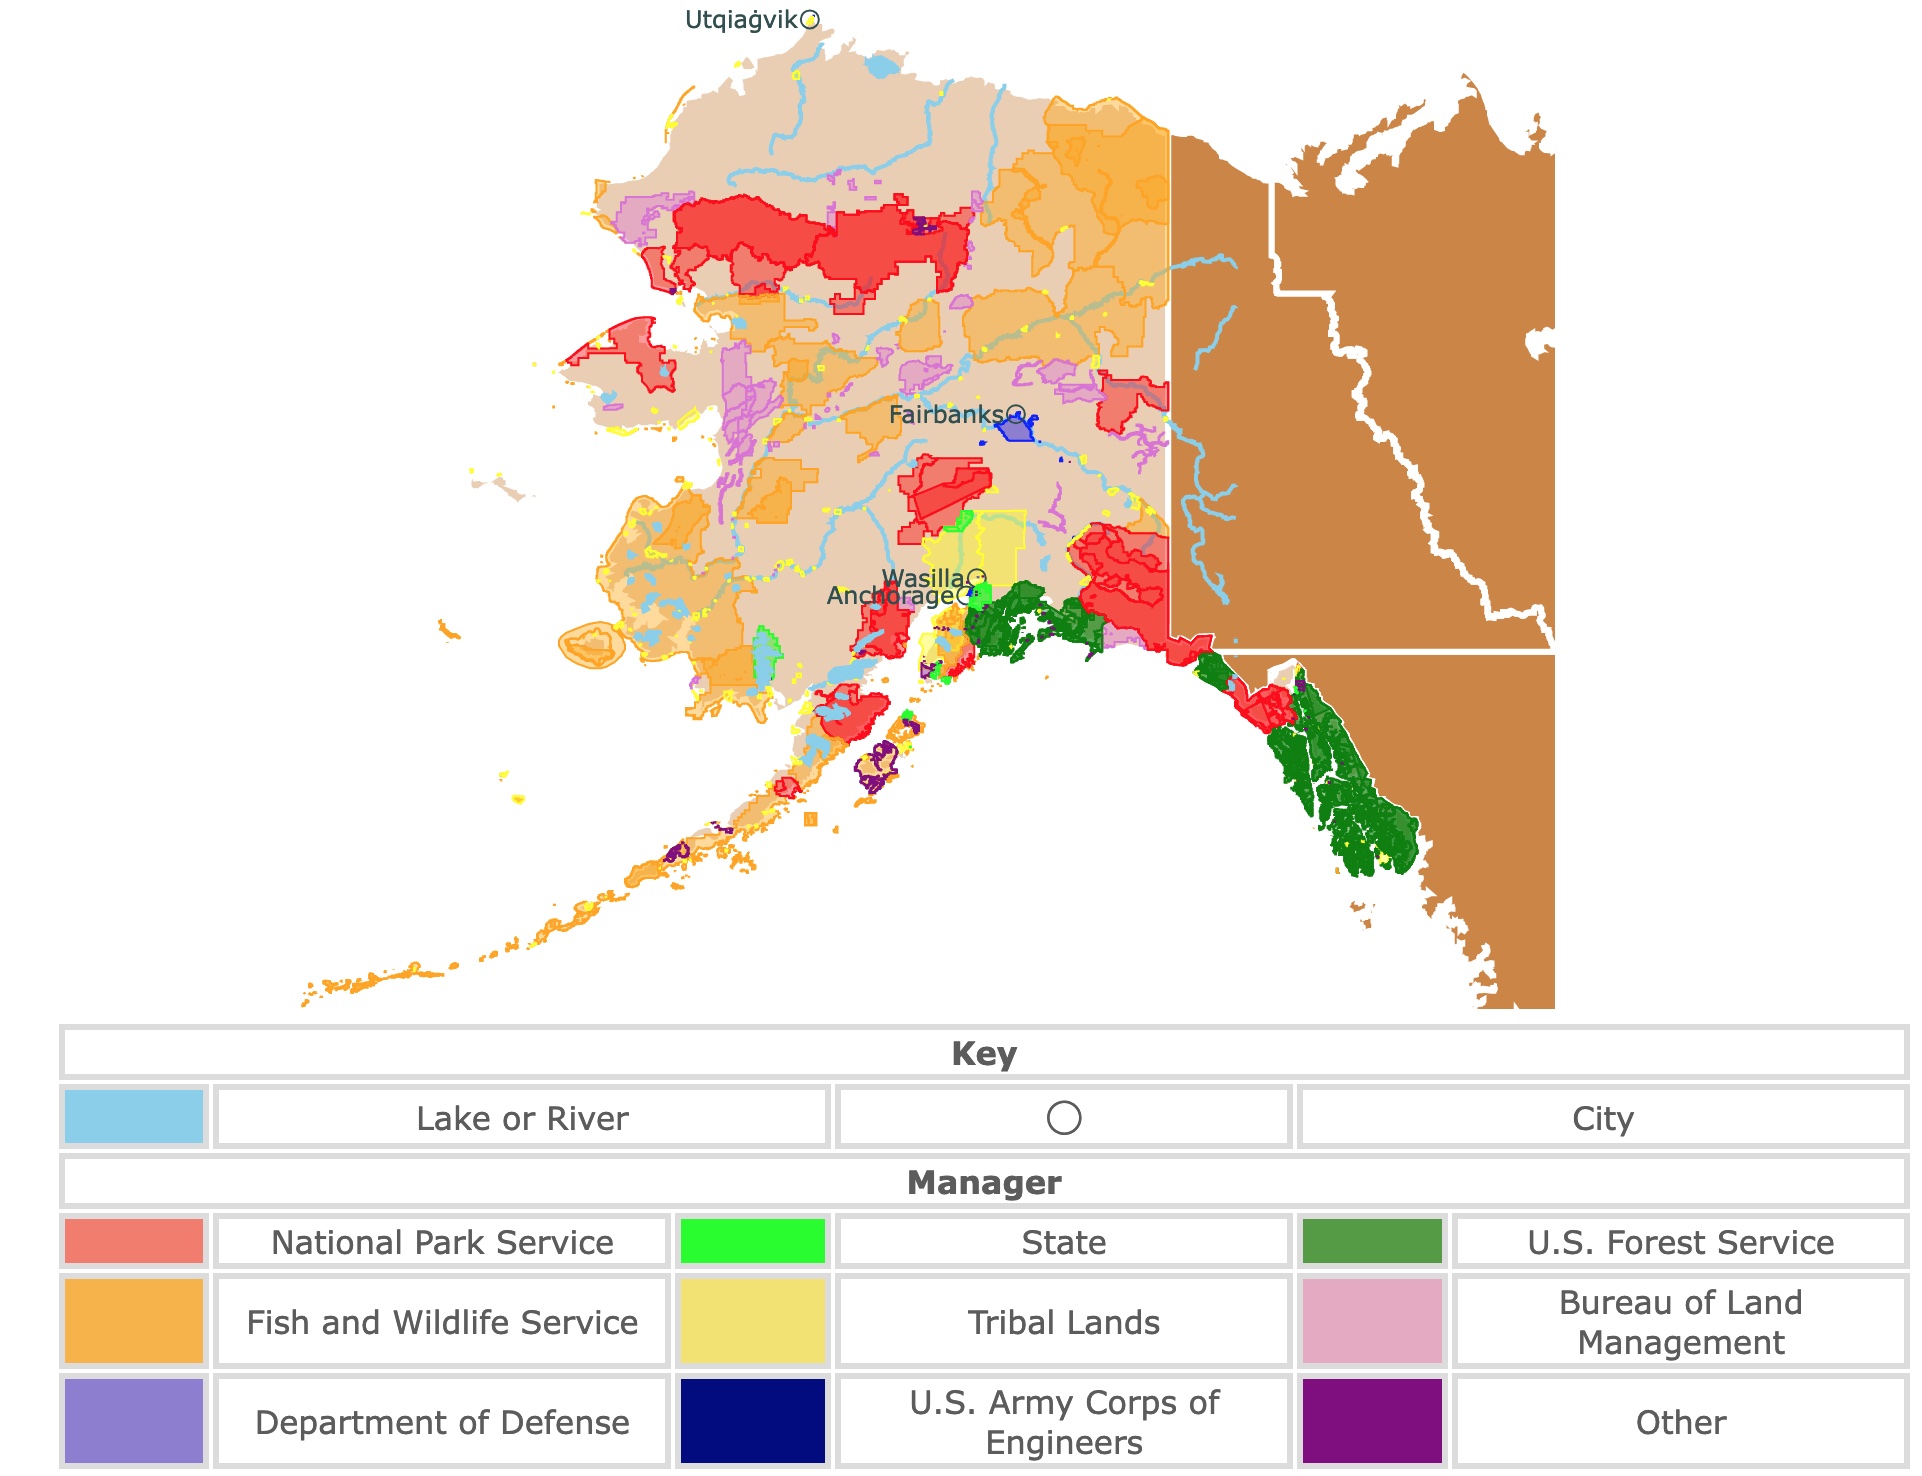 Map of Alaska's state parks, national parks, forests, and public lands areas